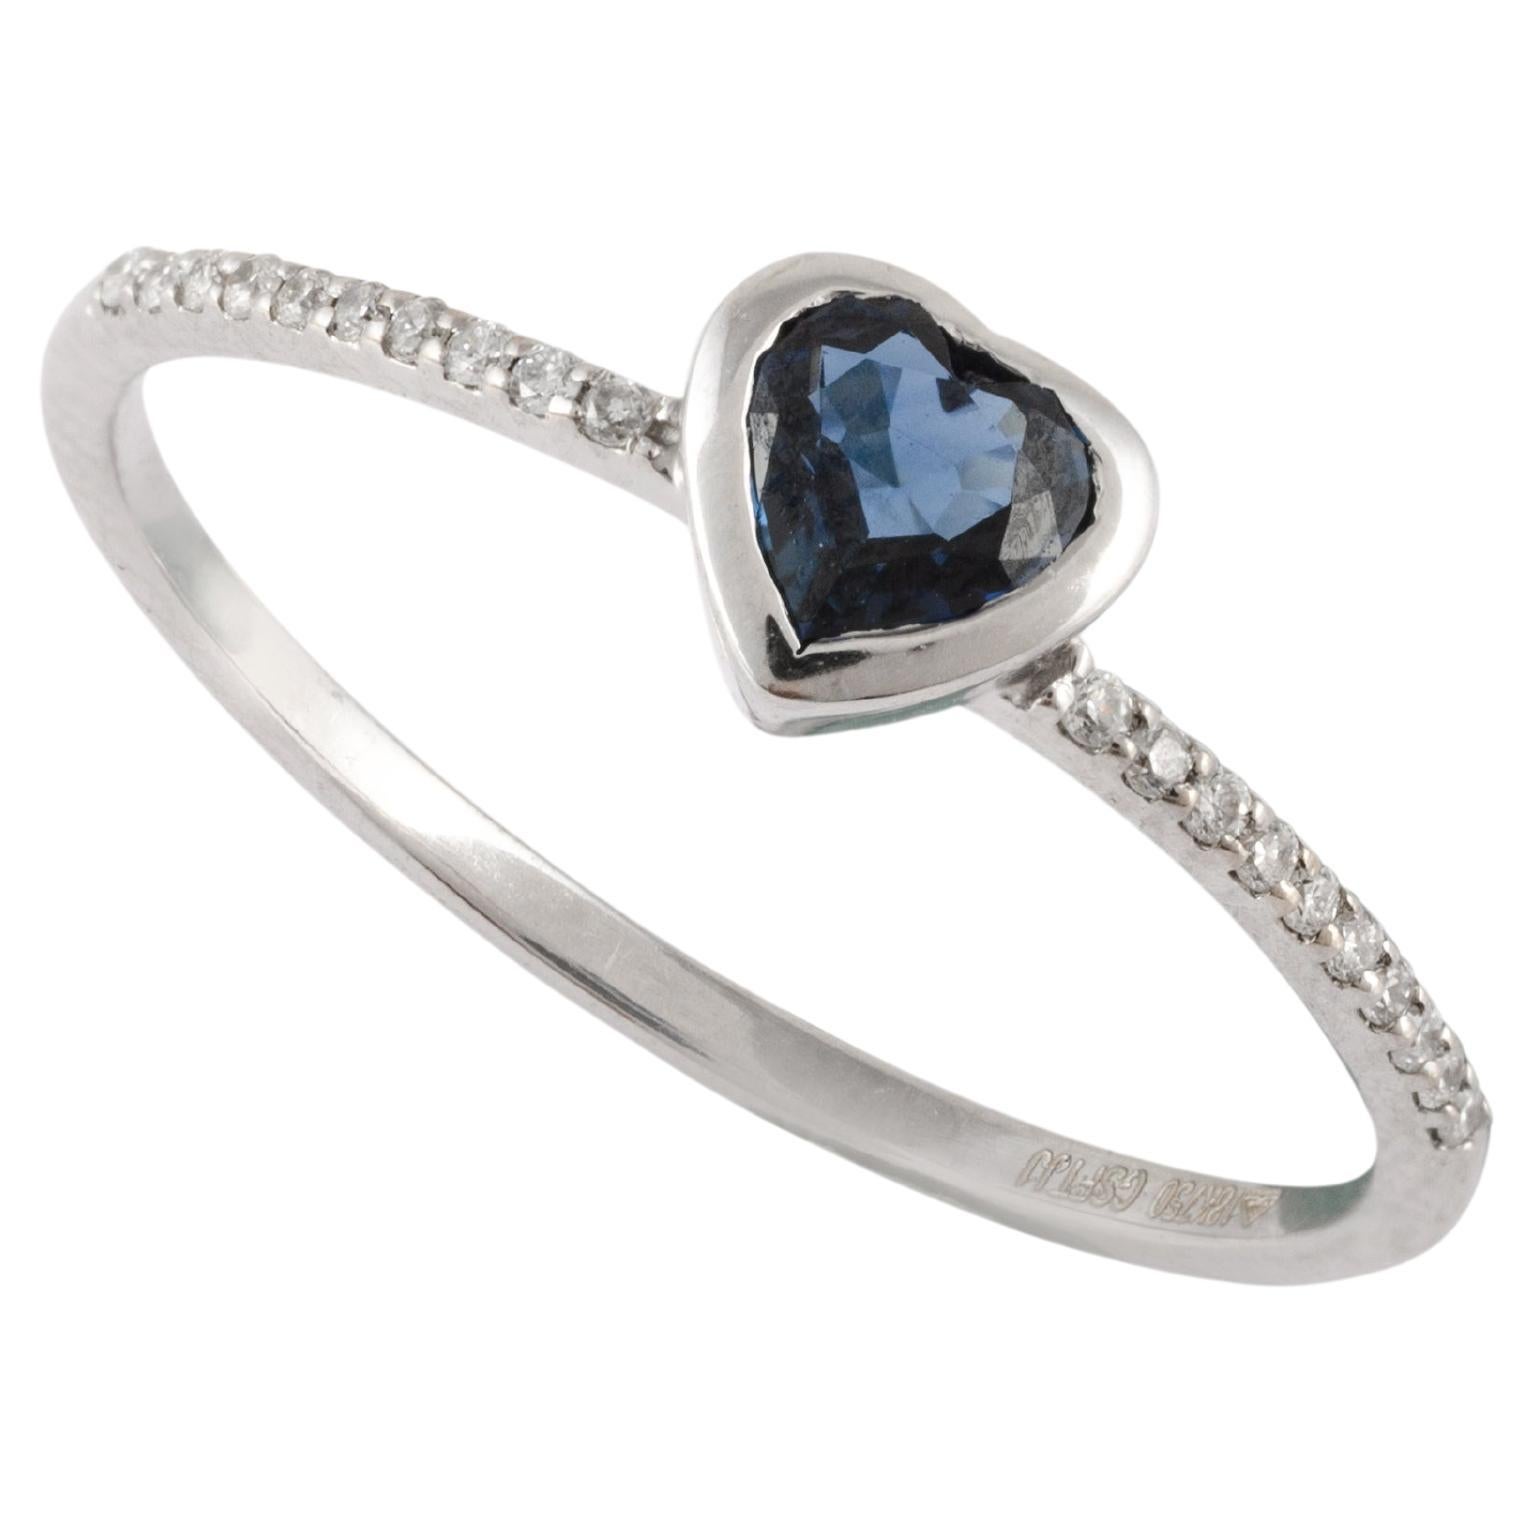 For Sale:  18 Karat Solid White Gold Dainty Blue Sapphire Heart Promise Ring with Diamonds